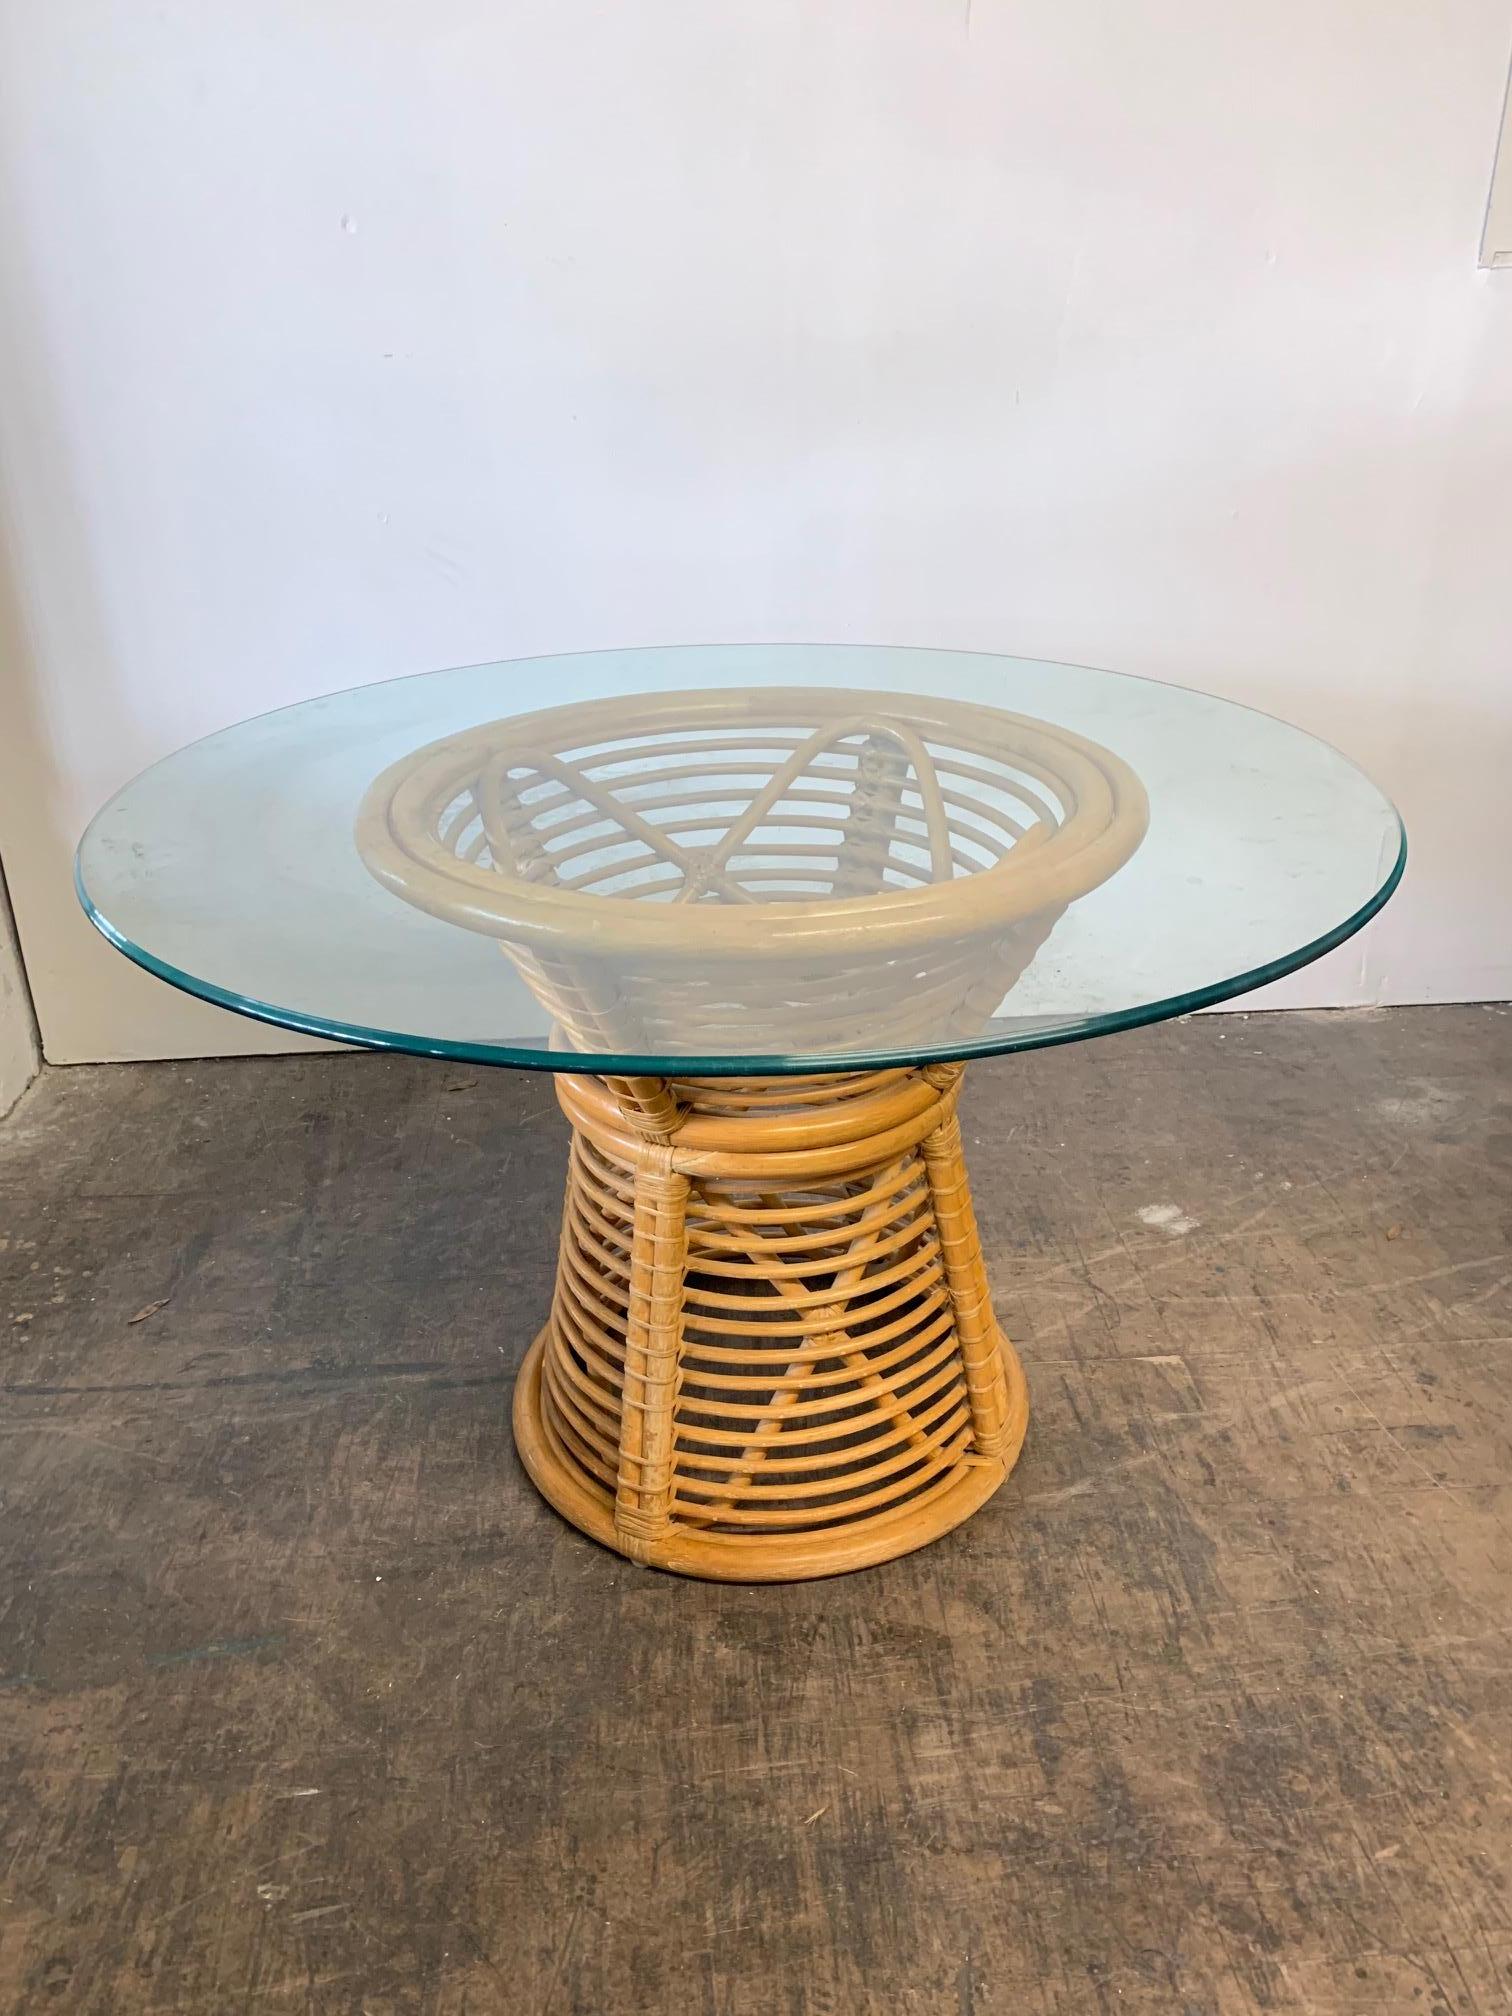 Pedestal dining table features horizontal rattan ring construction and a glass top. Unique hourglass shape. Very good condition.